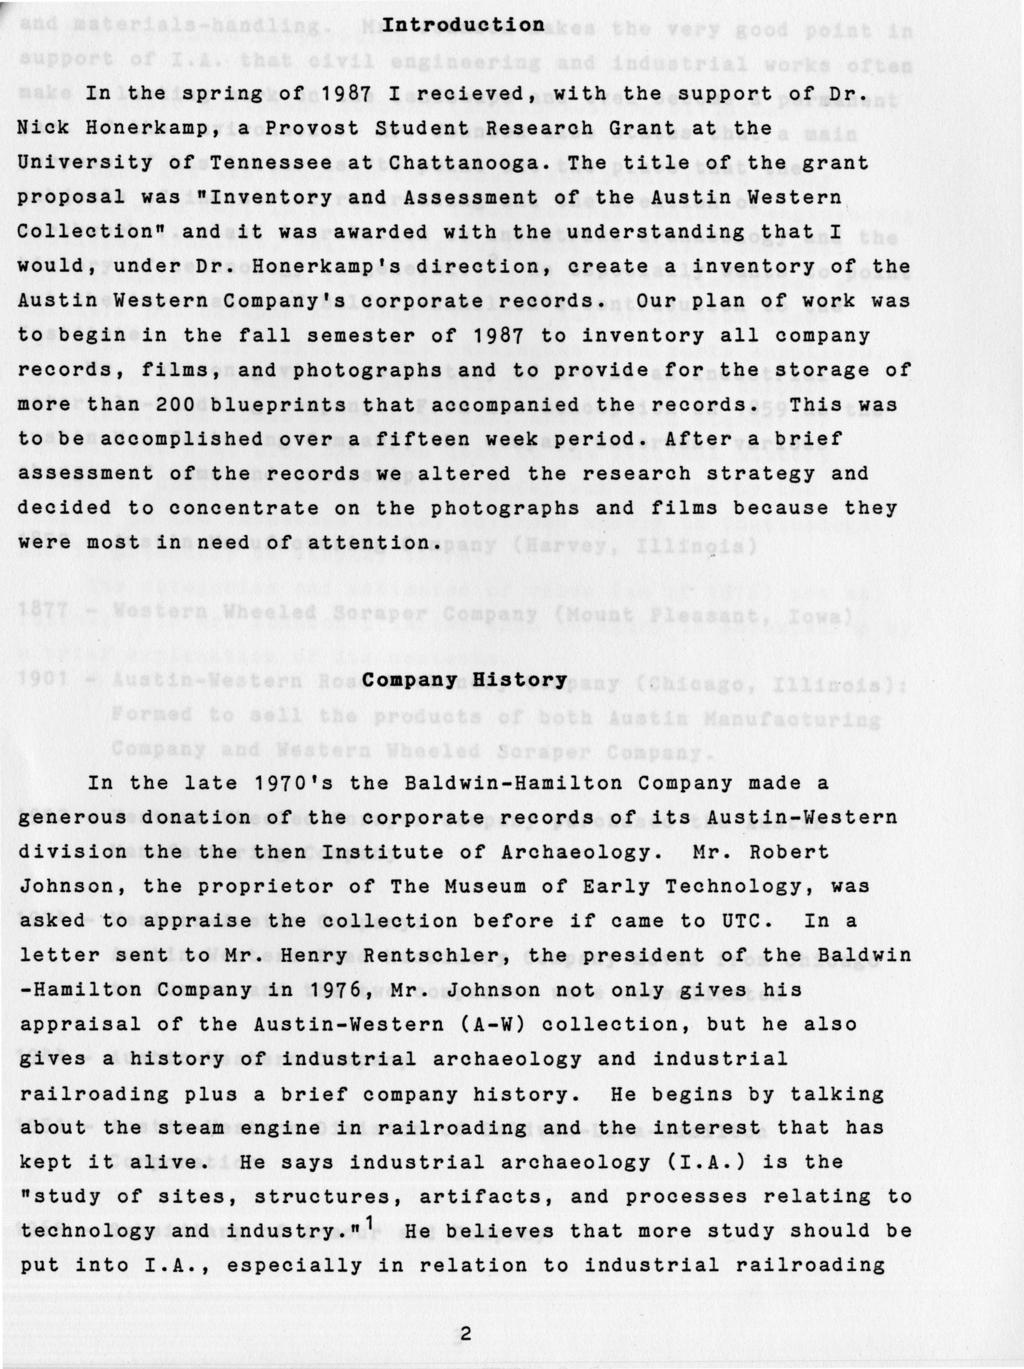 Introduction In the spring of 1987 I recieved, with the support of Dr. Nick Honerkamp, a Provost Student Research Grant at the University of Tennessee at Chattanooga.